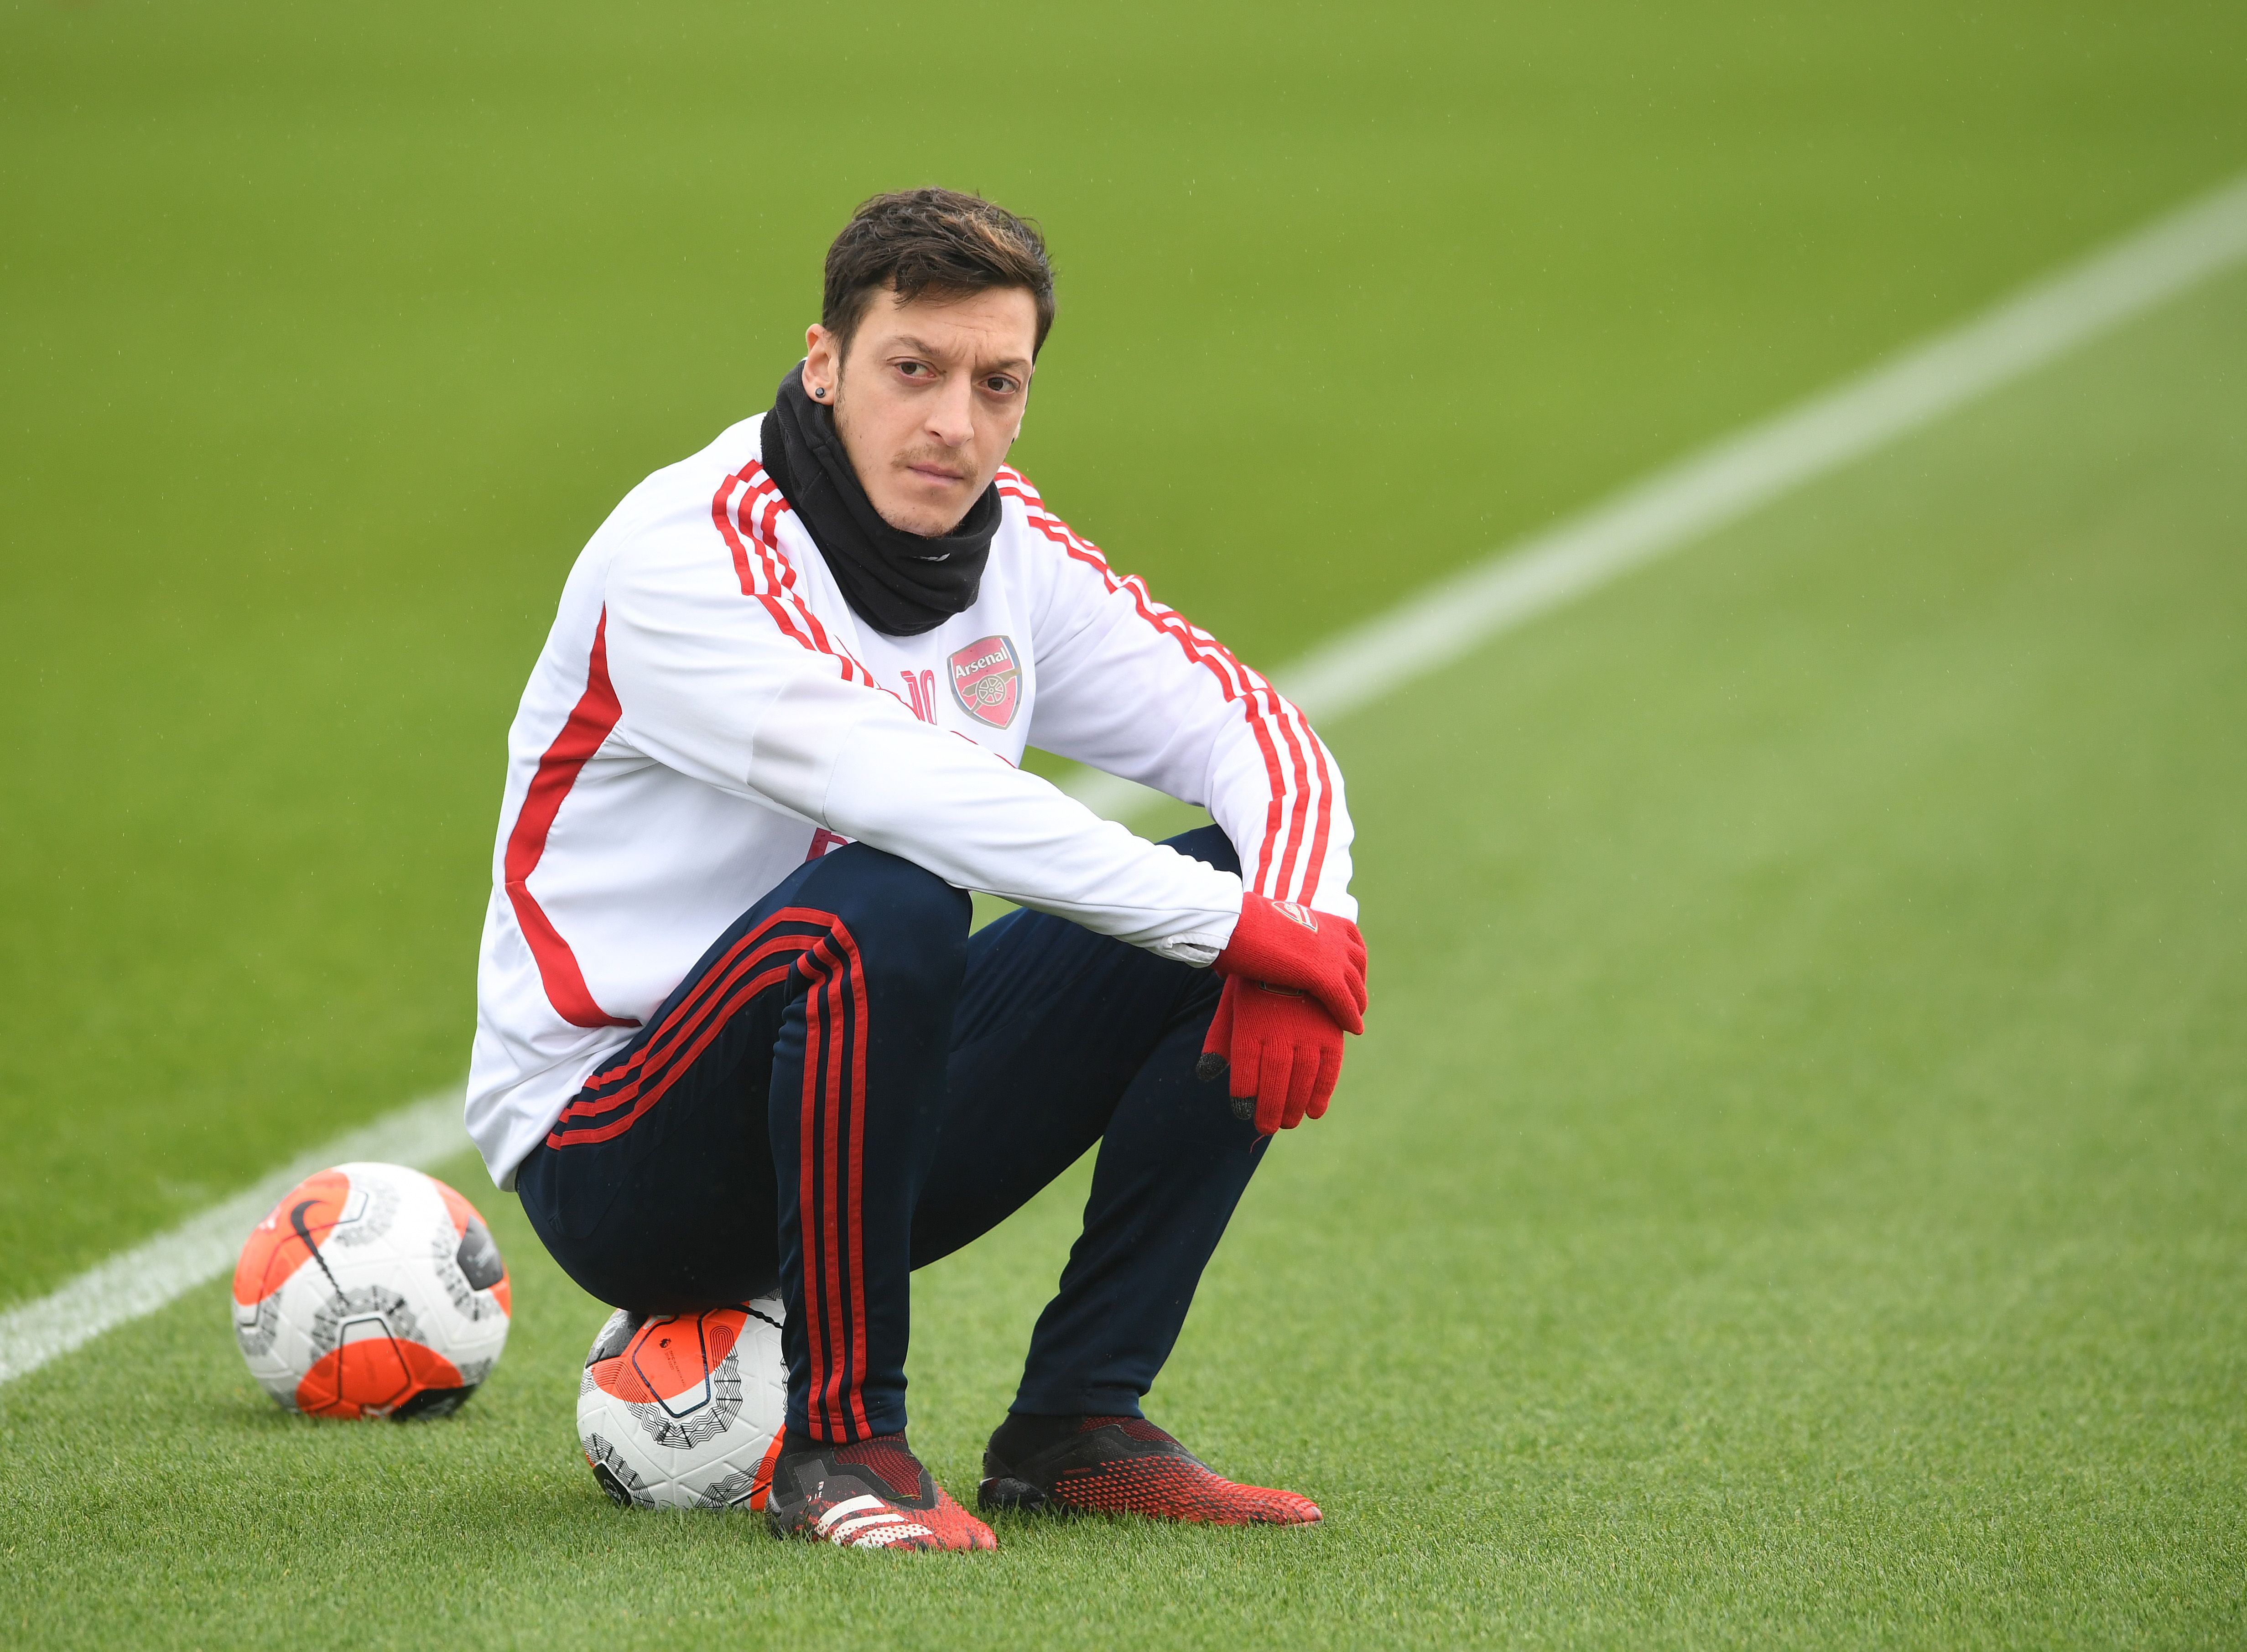 Mesut Ozil of Arsenal during Arsenal Training Session at London Colney on March 10, 2020.